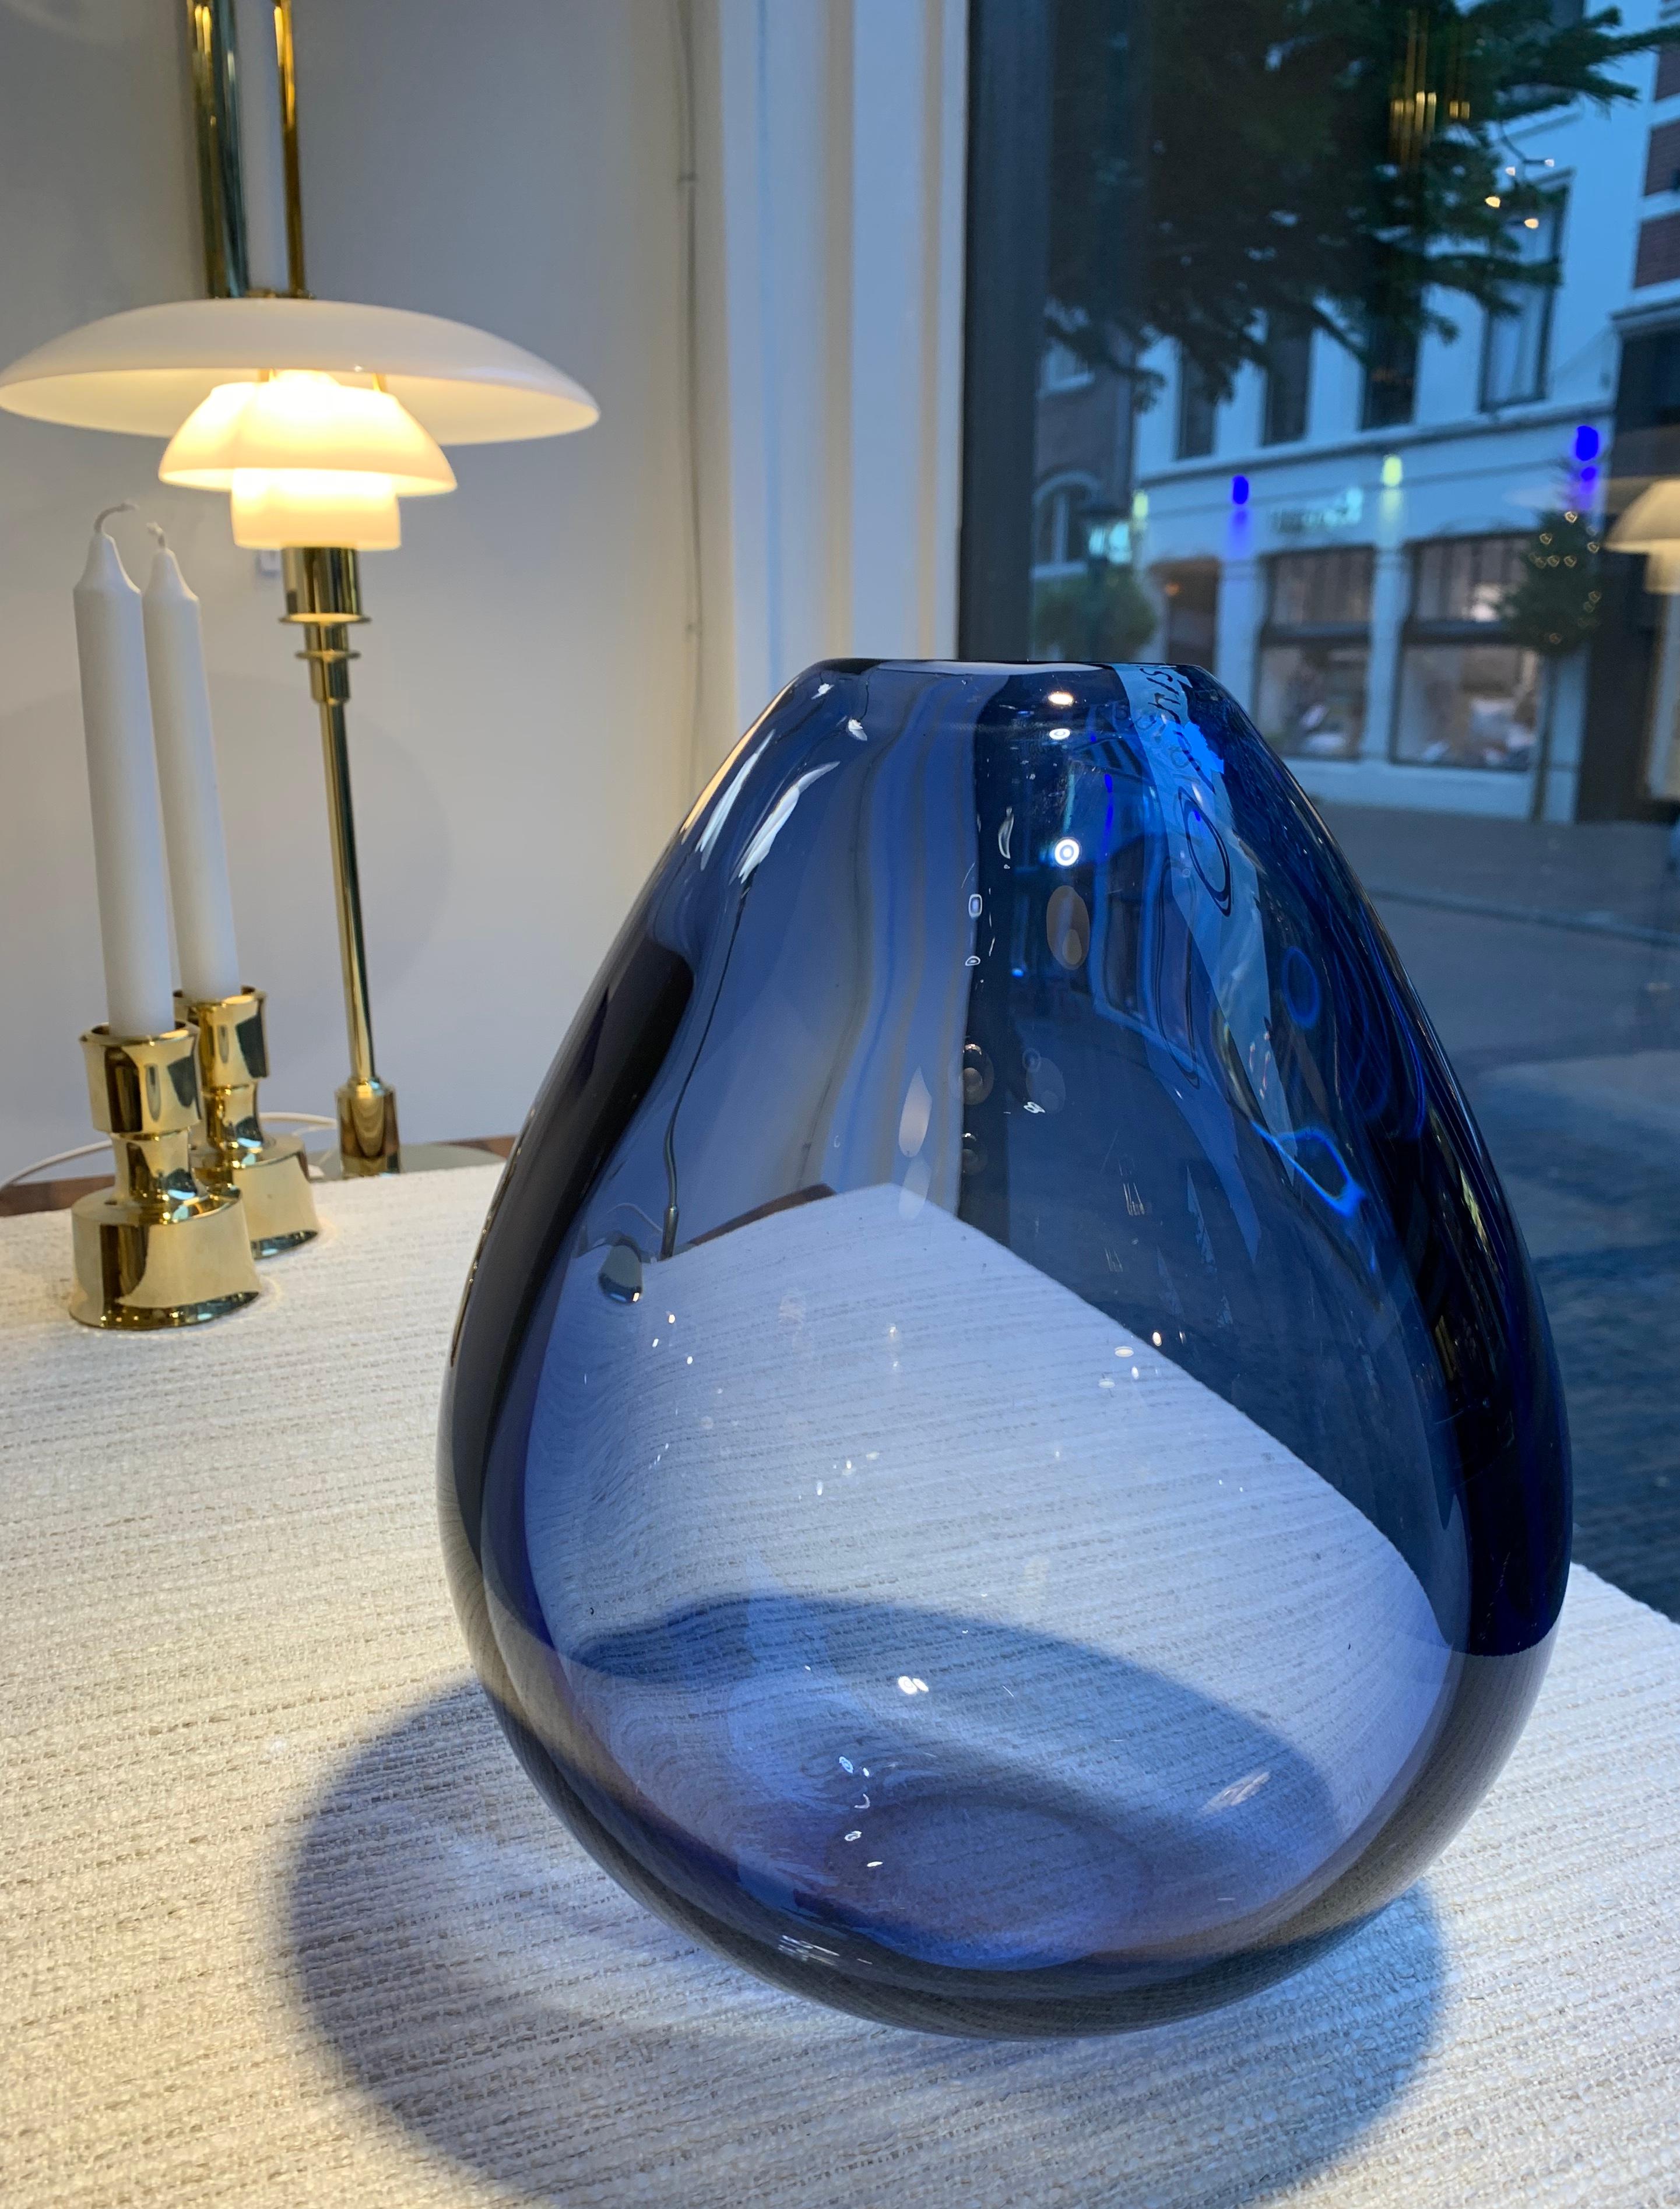 Mouth blown second largest size 'Drop Vase' by Danish glass designer Per Lütken for Holmegaard, Denmark. 
Very heavy solid vase in striking electric blue Sapphire colour. Designed by P. Lütkin in 1955. 

These organic shaped mouth blown vases